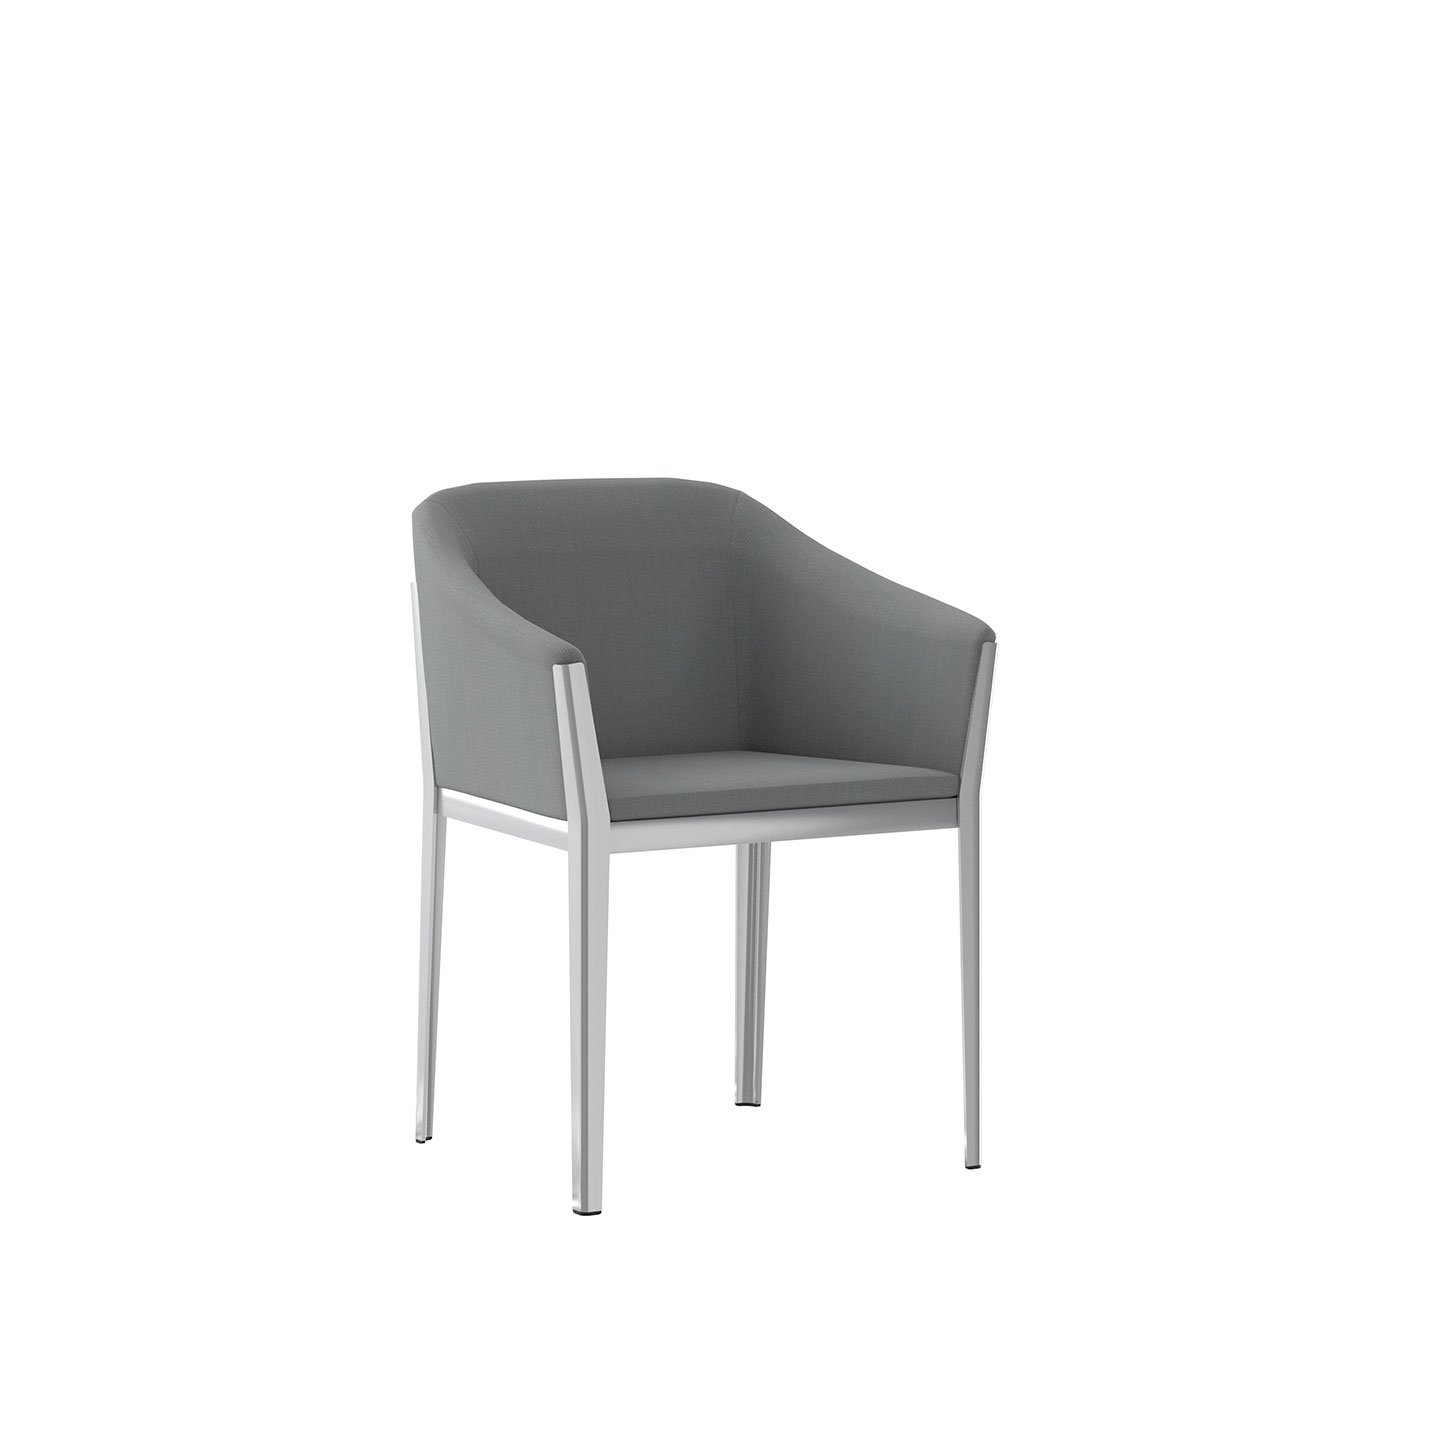 Haworth Cotone Slim chair in grey color with metal legs